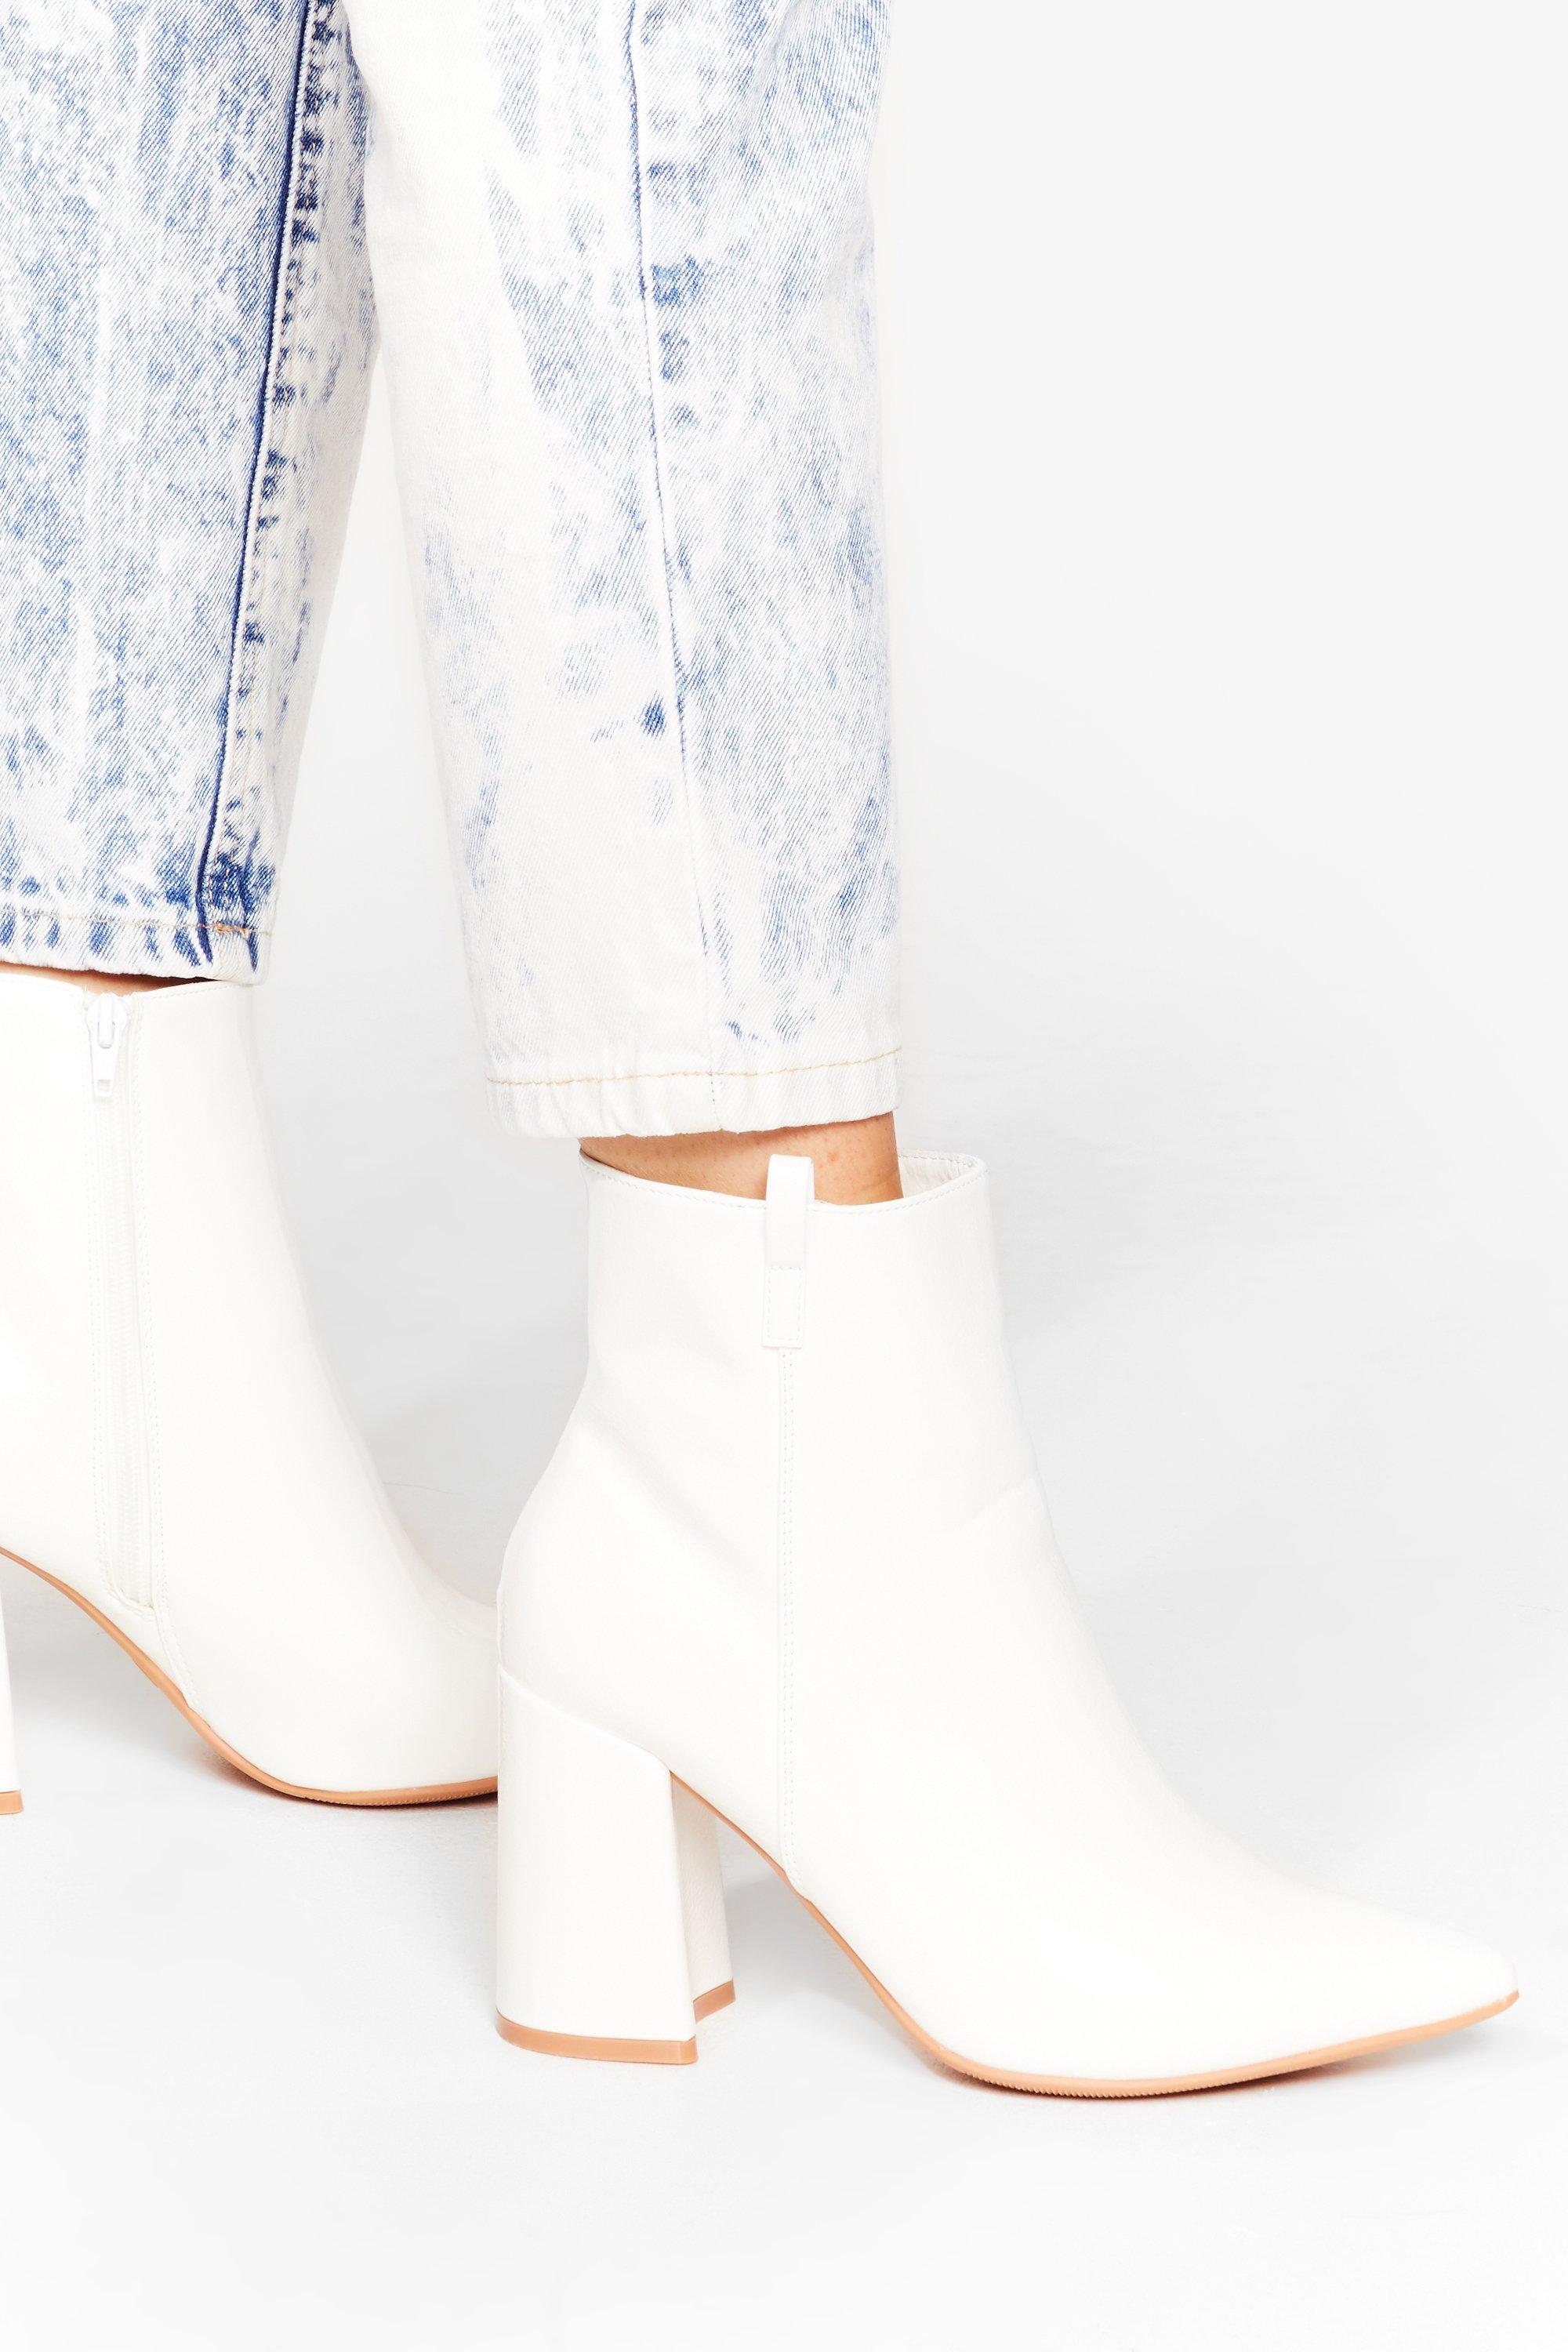 wide fit white boots